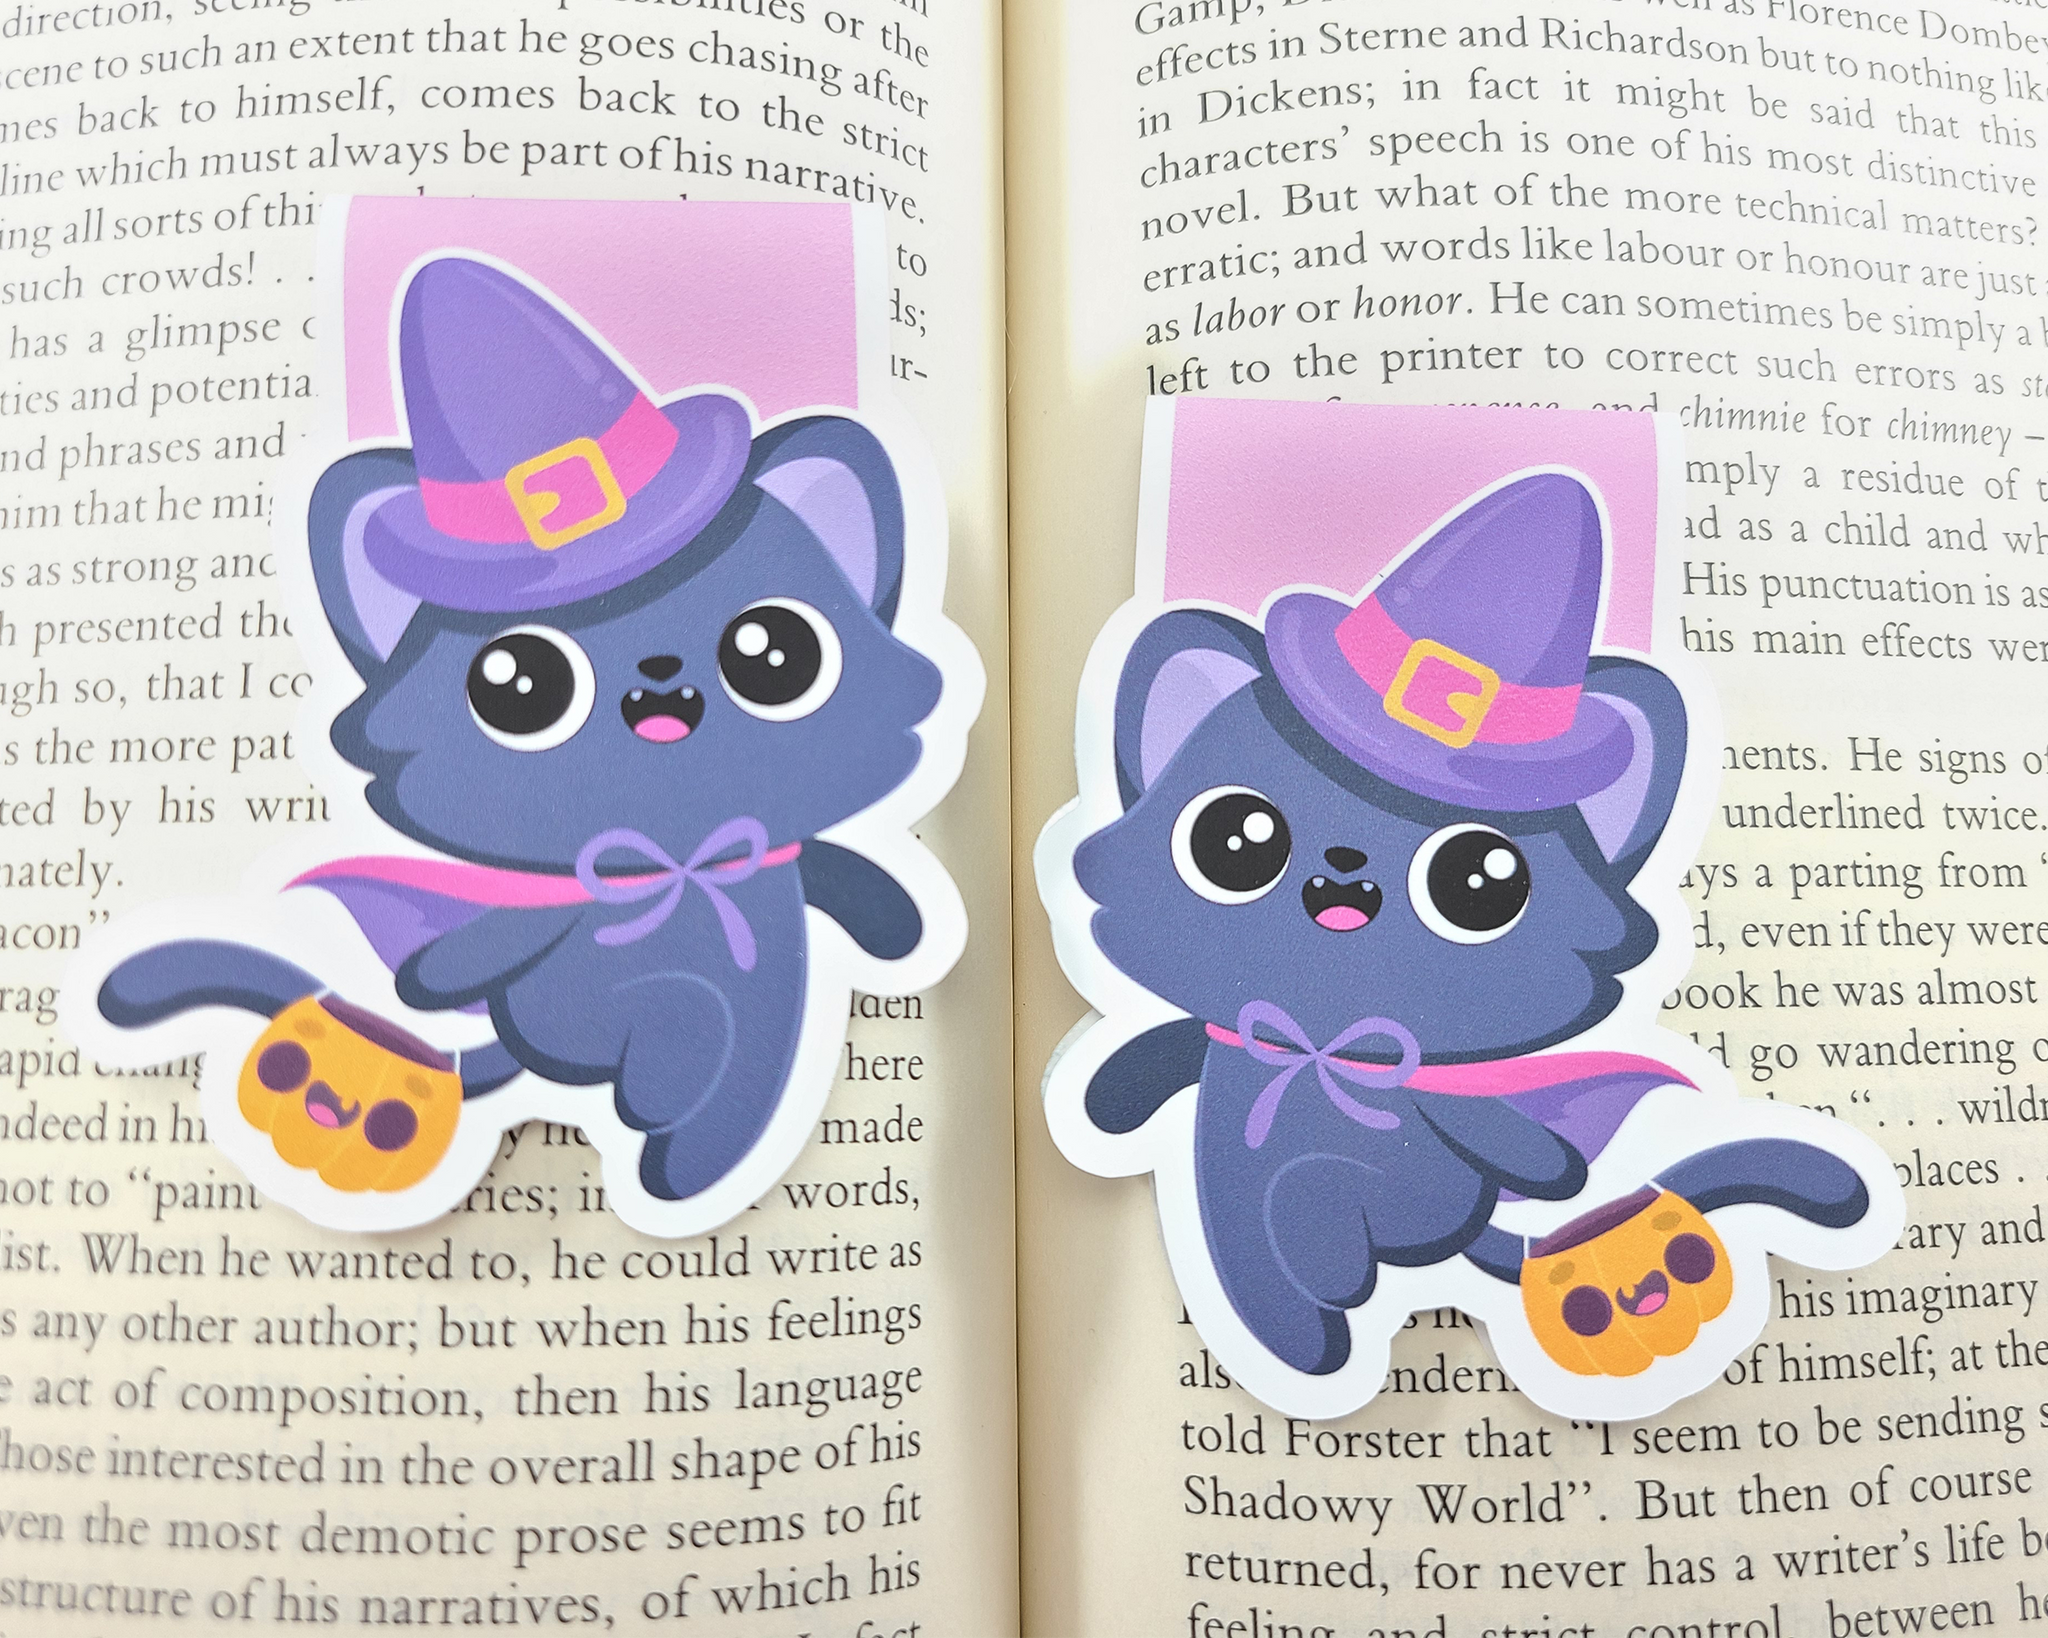 Halloween Cat Witch Magnetic Bookmark